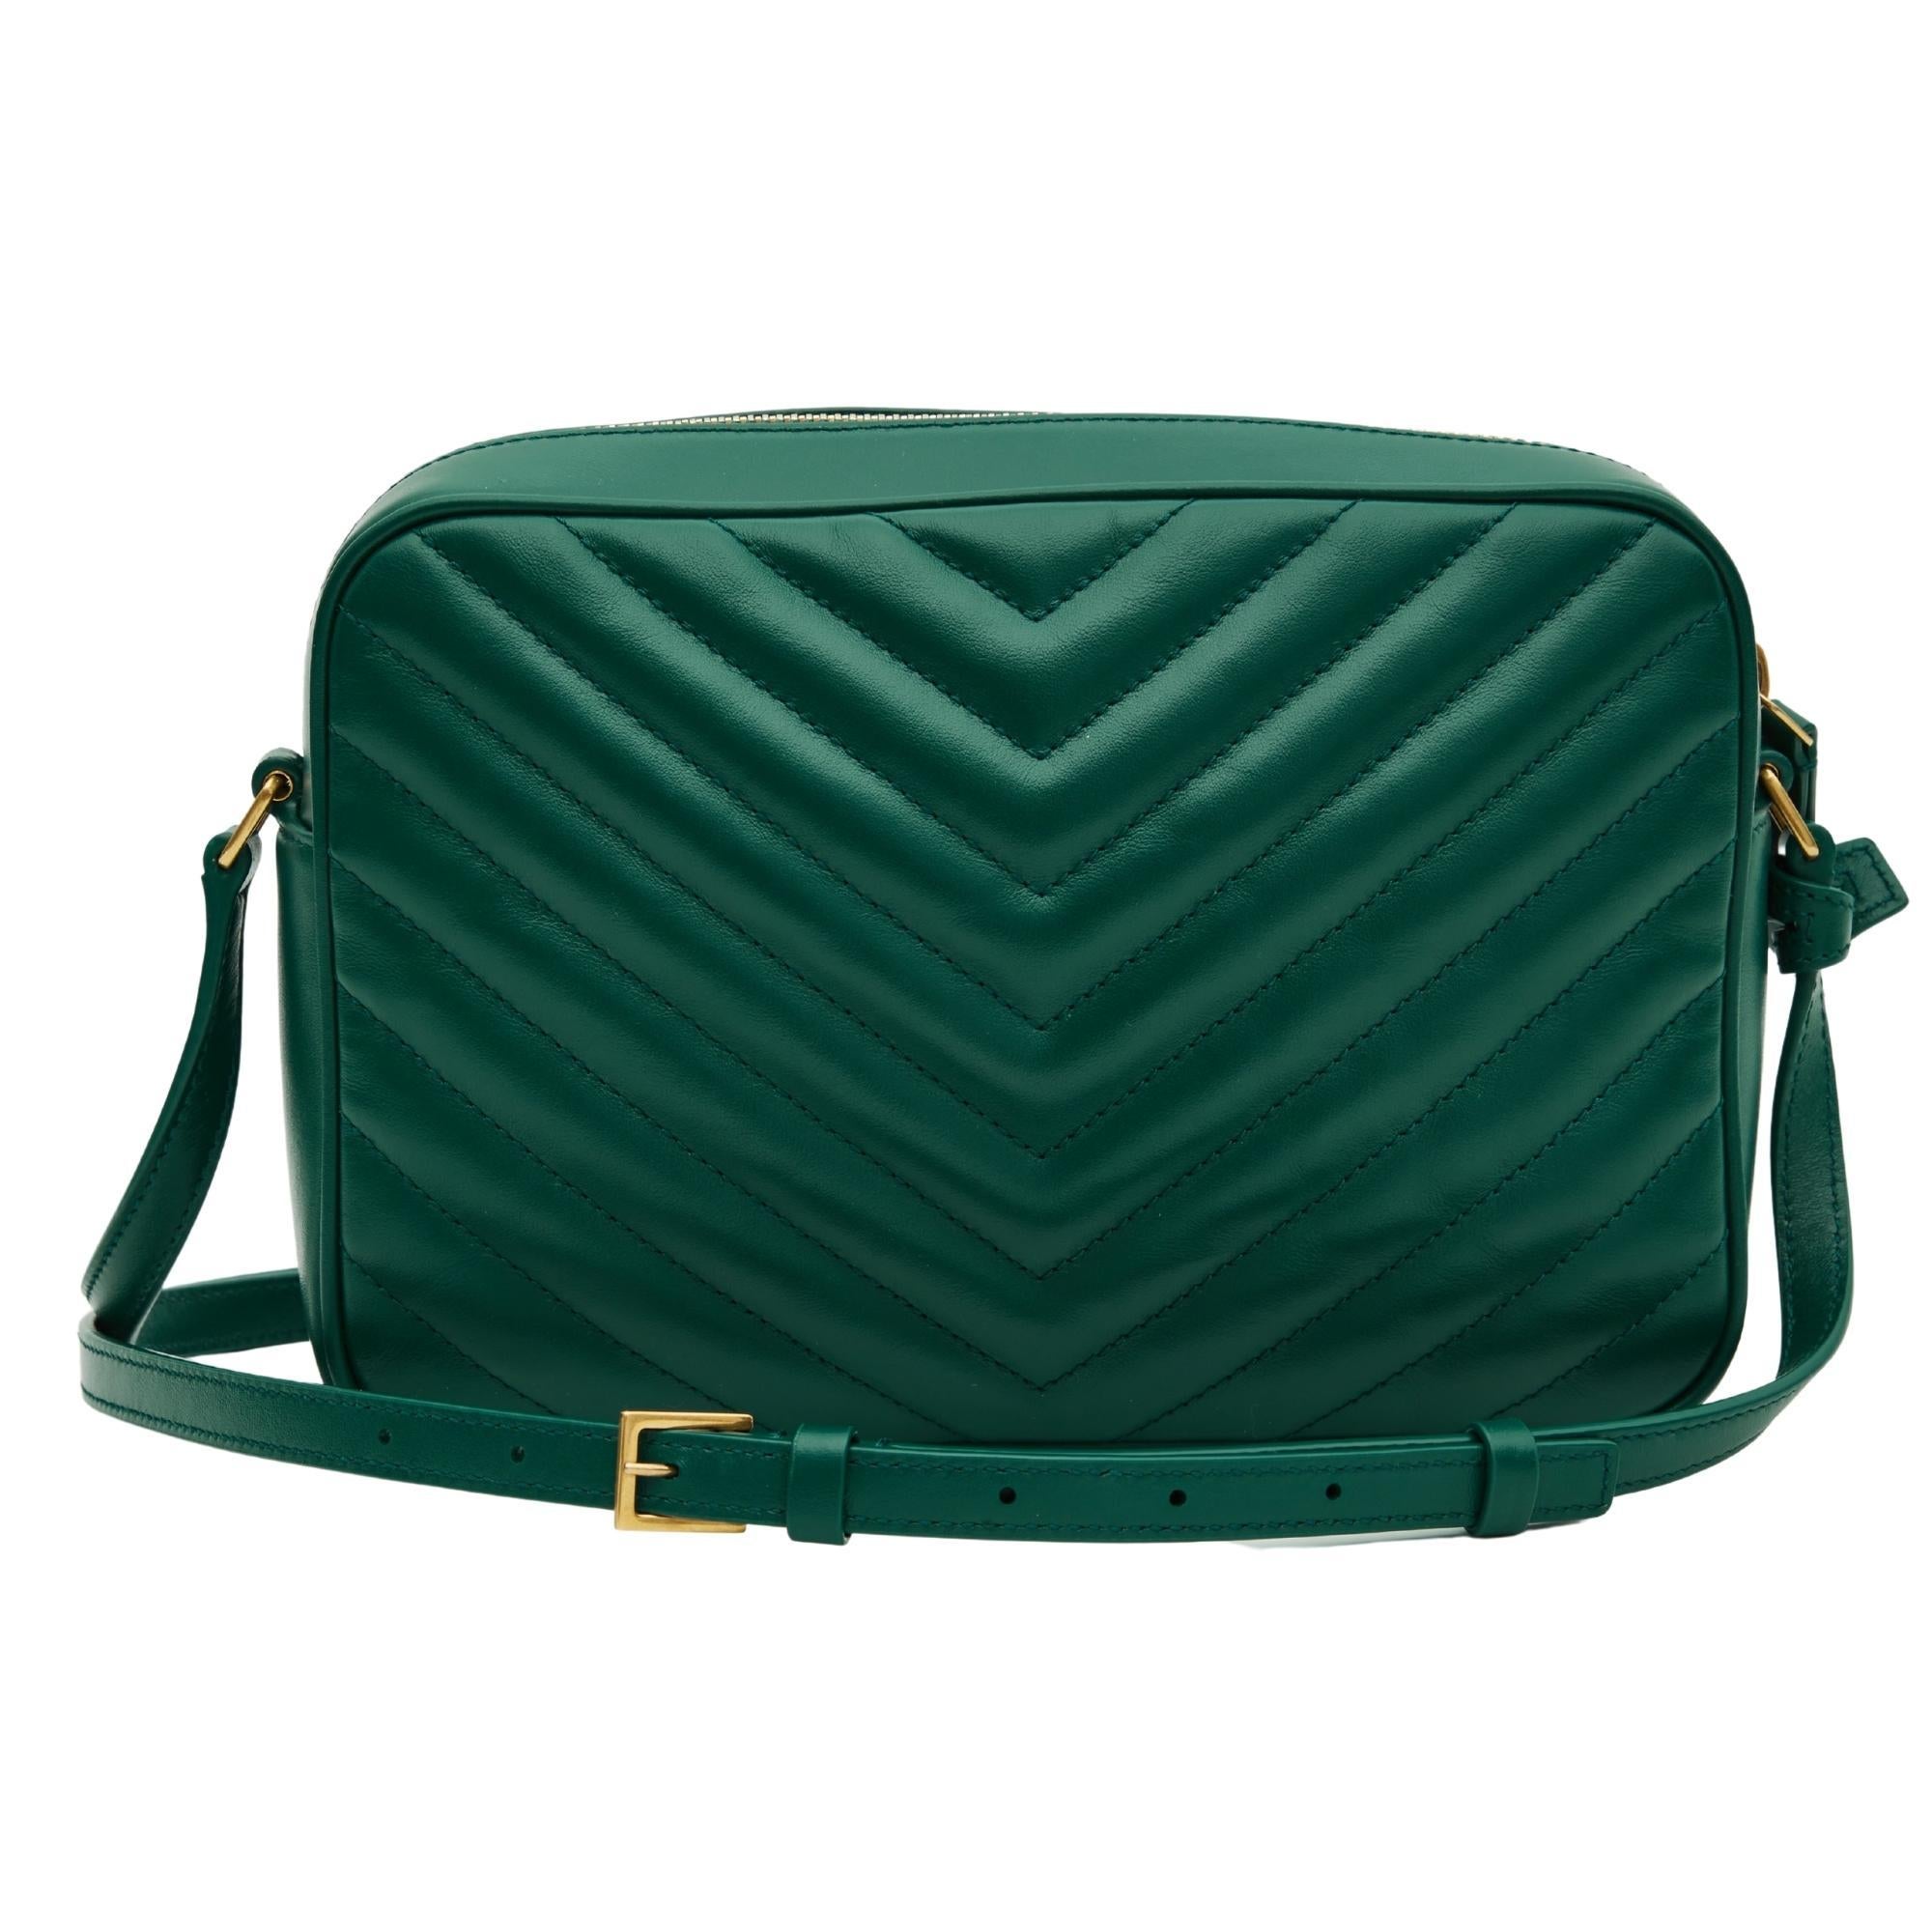 *Authenticated by entrupy*

This bag is made with calfskin leather in green and features a chevron matelasse stitch, a YSL monogram metallic logo, gold tone hardware, a decorative attachable tassel, a long adjustable shoulder strap, top zipper